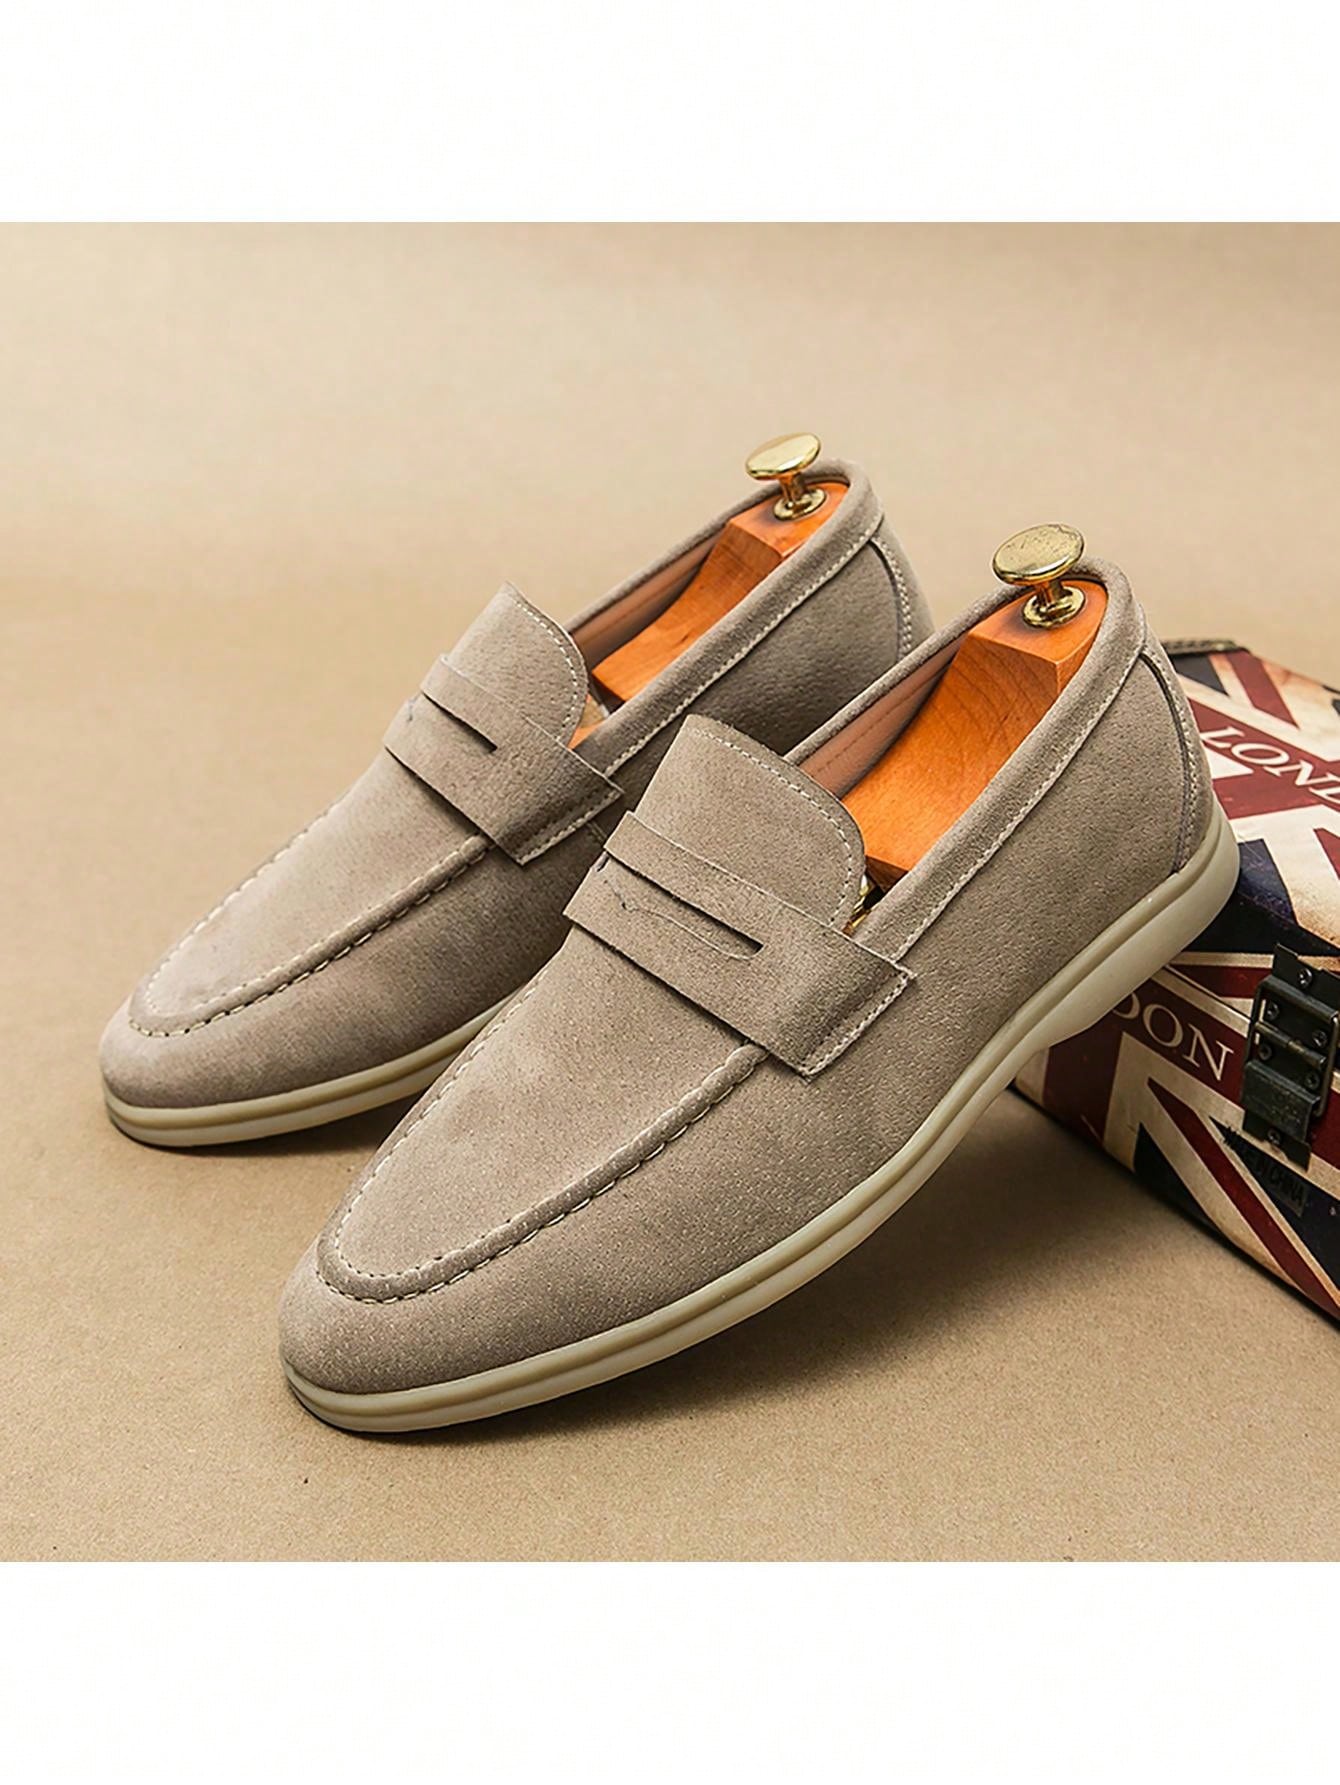 Men's Super Soft Leather Comfortable Loafers, Fabric, Low-top Slip-on Shoes, Business Formal Shoes, Minimalist Occupational Work Shoes, Casual Shoes, Fashionable Trendy Men's Dress Shoes, Round Toe Comfortable England Style Formal Shoes, Dress Shoes, All